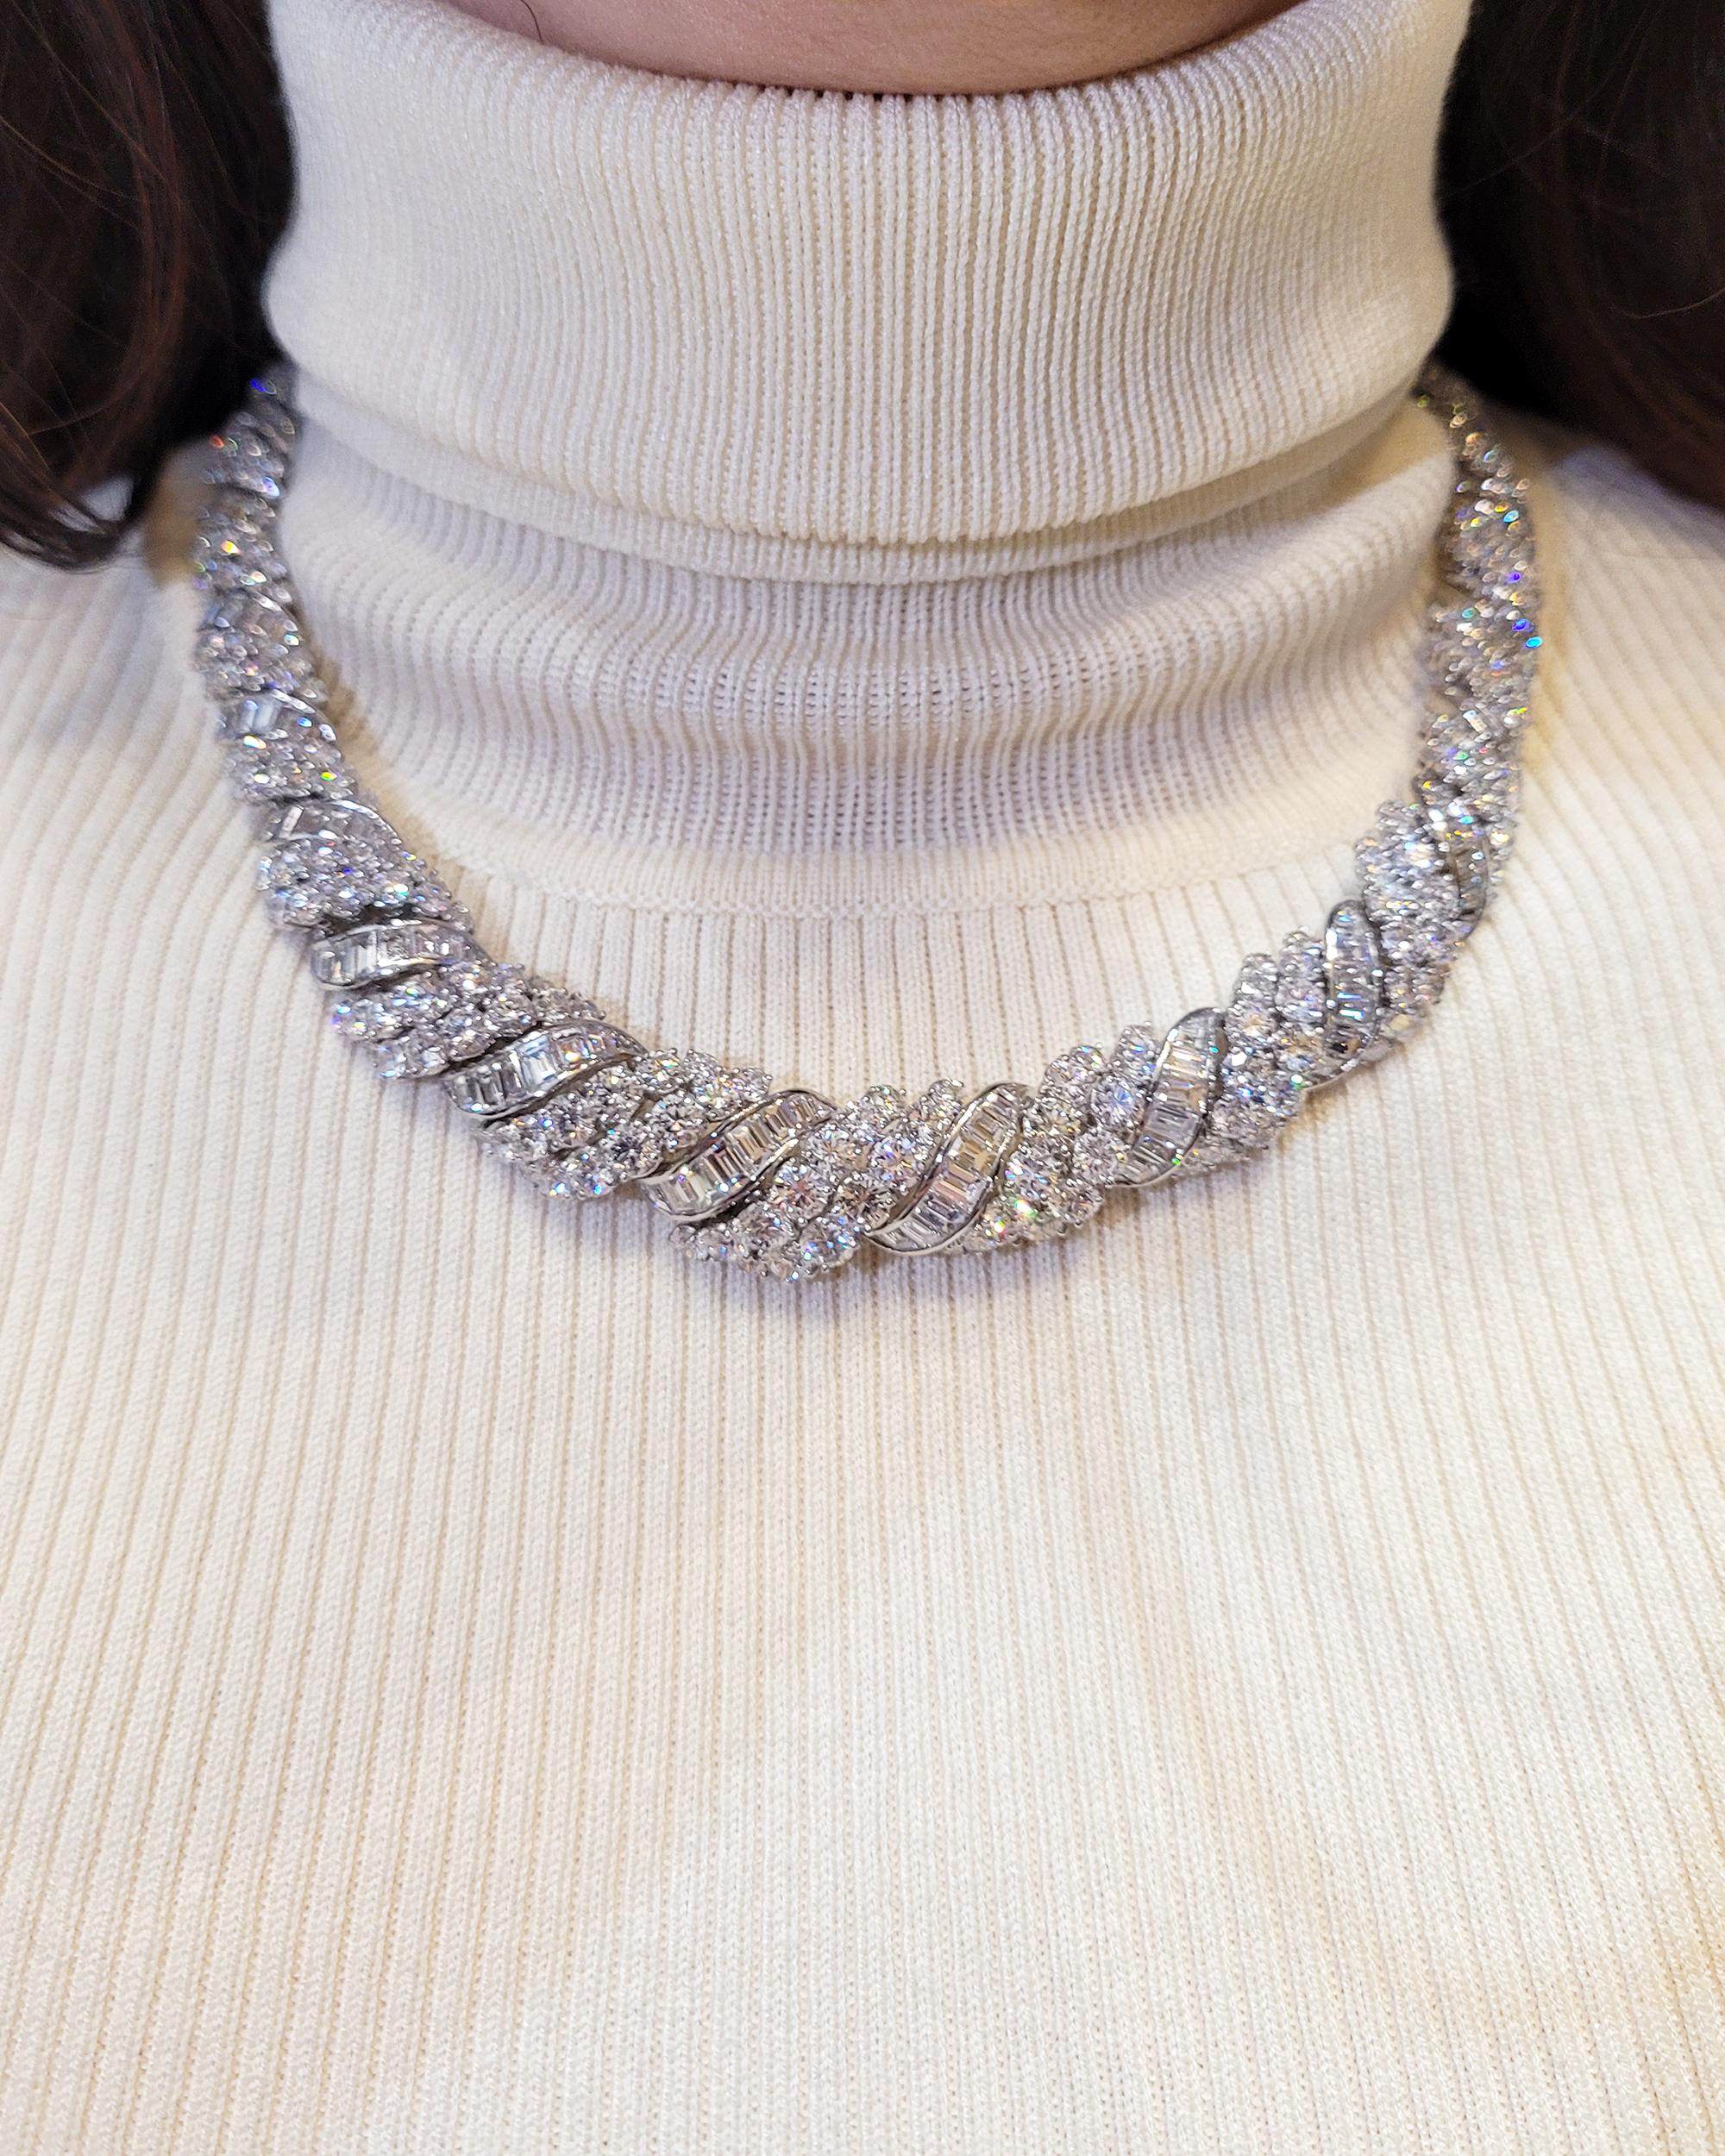 Embark on a journey of refined opulence with this Radiant Scrolls Diamond Necklace - an exquisite embodiment of timeless luxury. Crafted in the rarefied embrace of platinum, this necklace is a dazzling testament to the artistry of haute joaillerie.